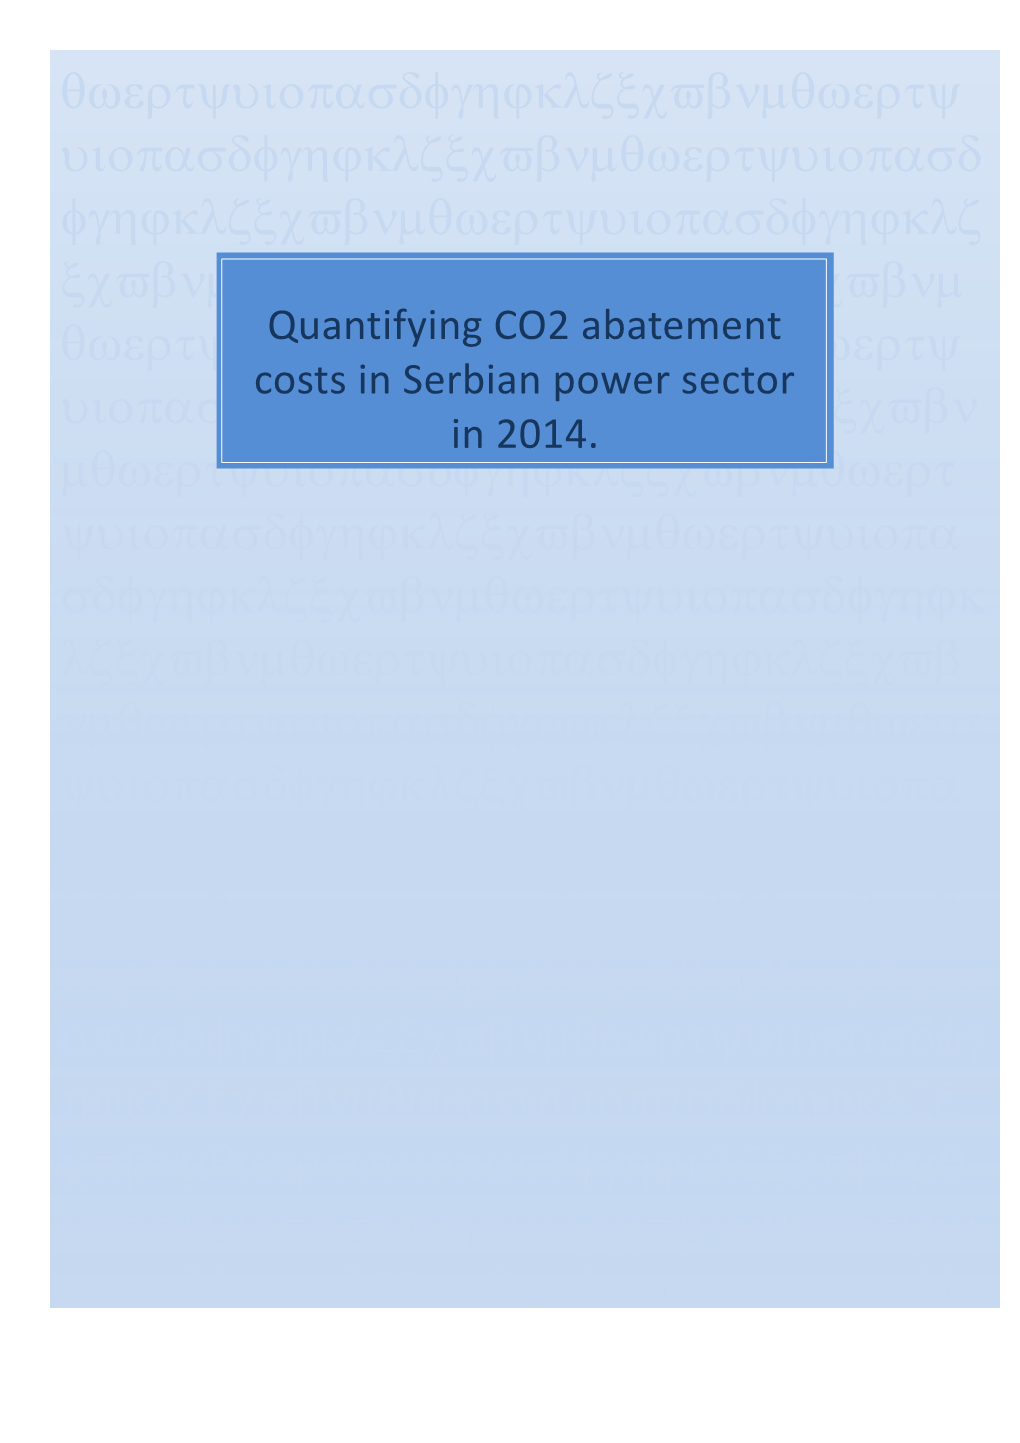 Quantifying CO2 Abatement Costs in Serbian Power Sector in 2014